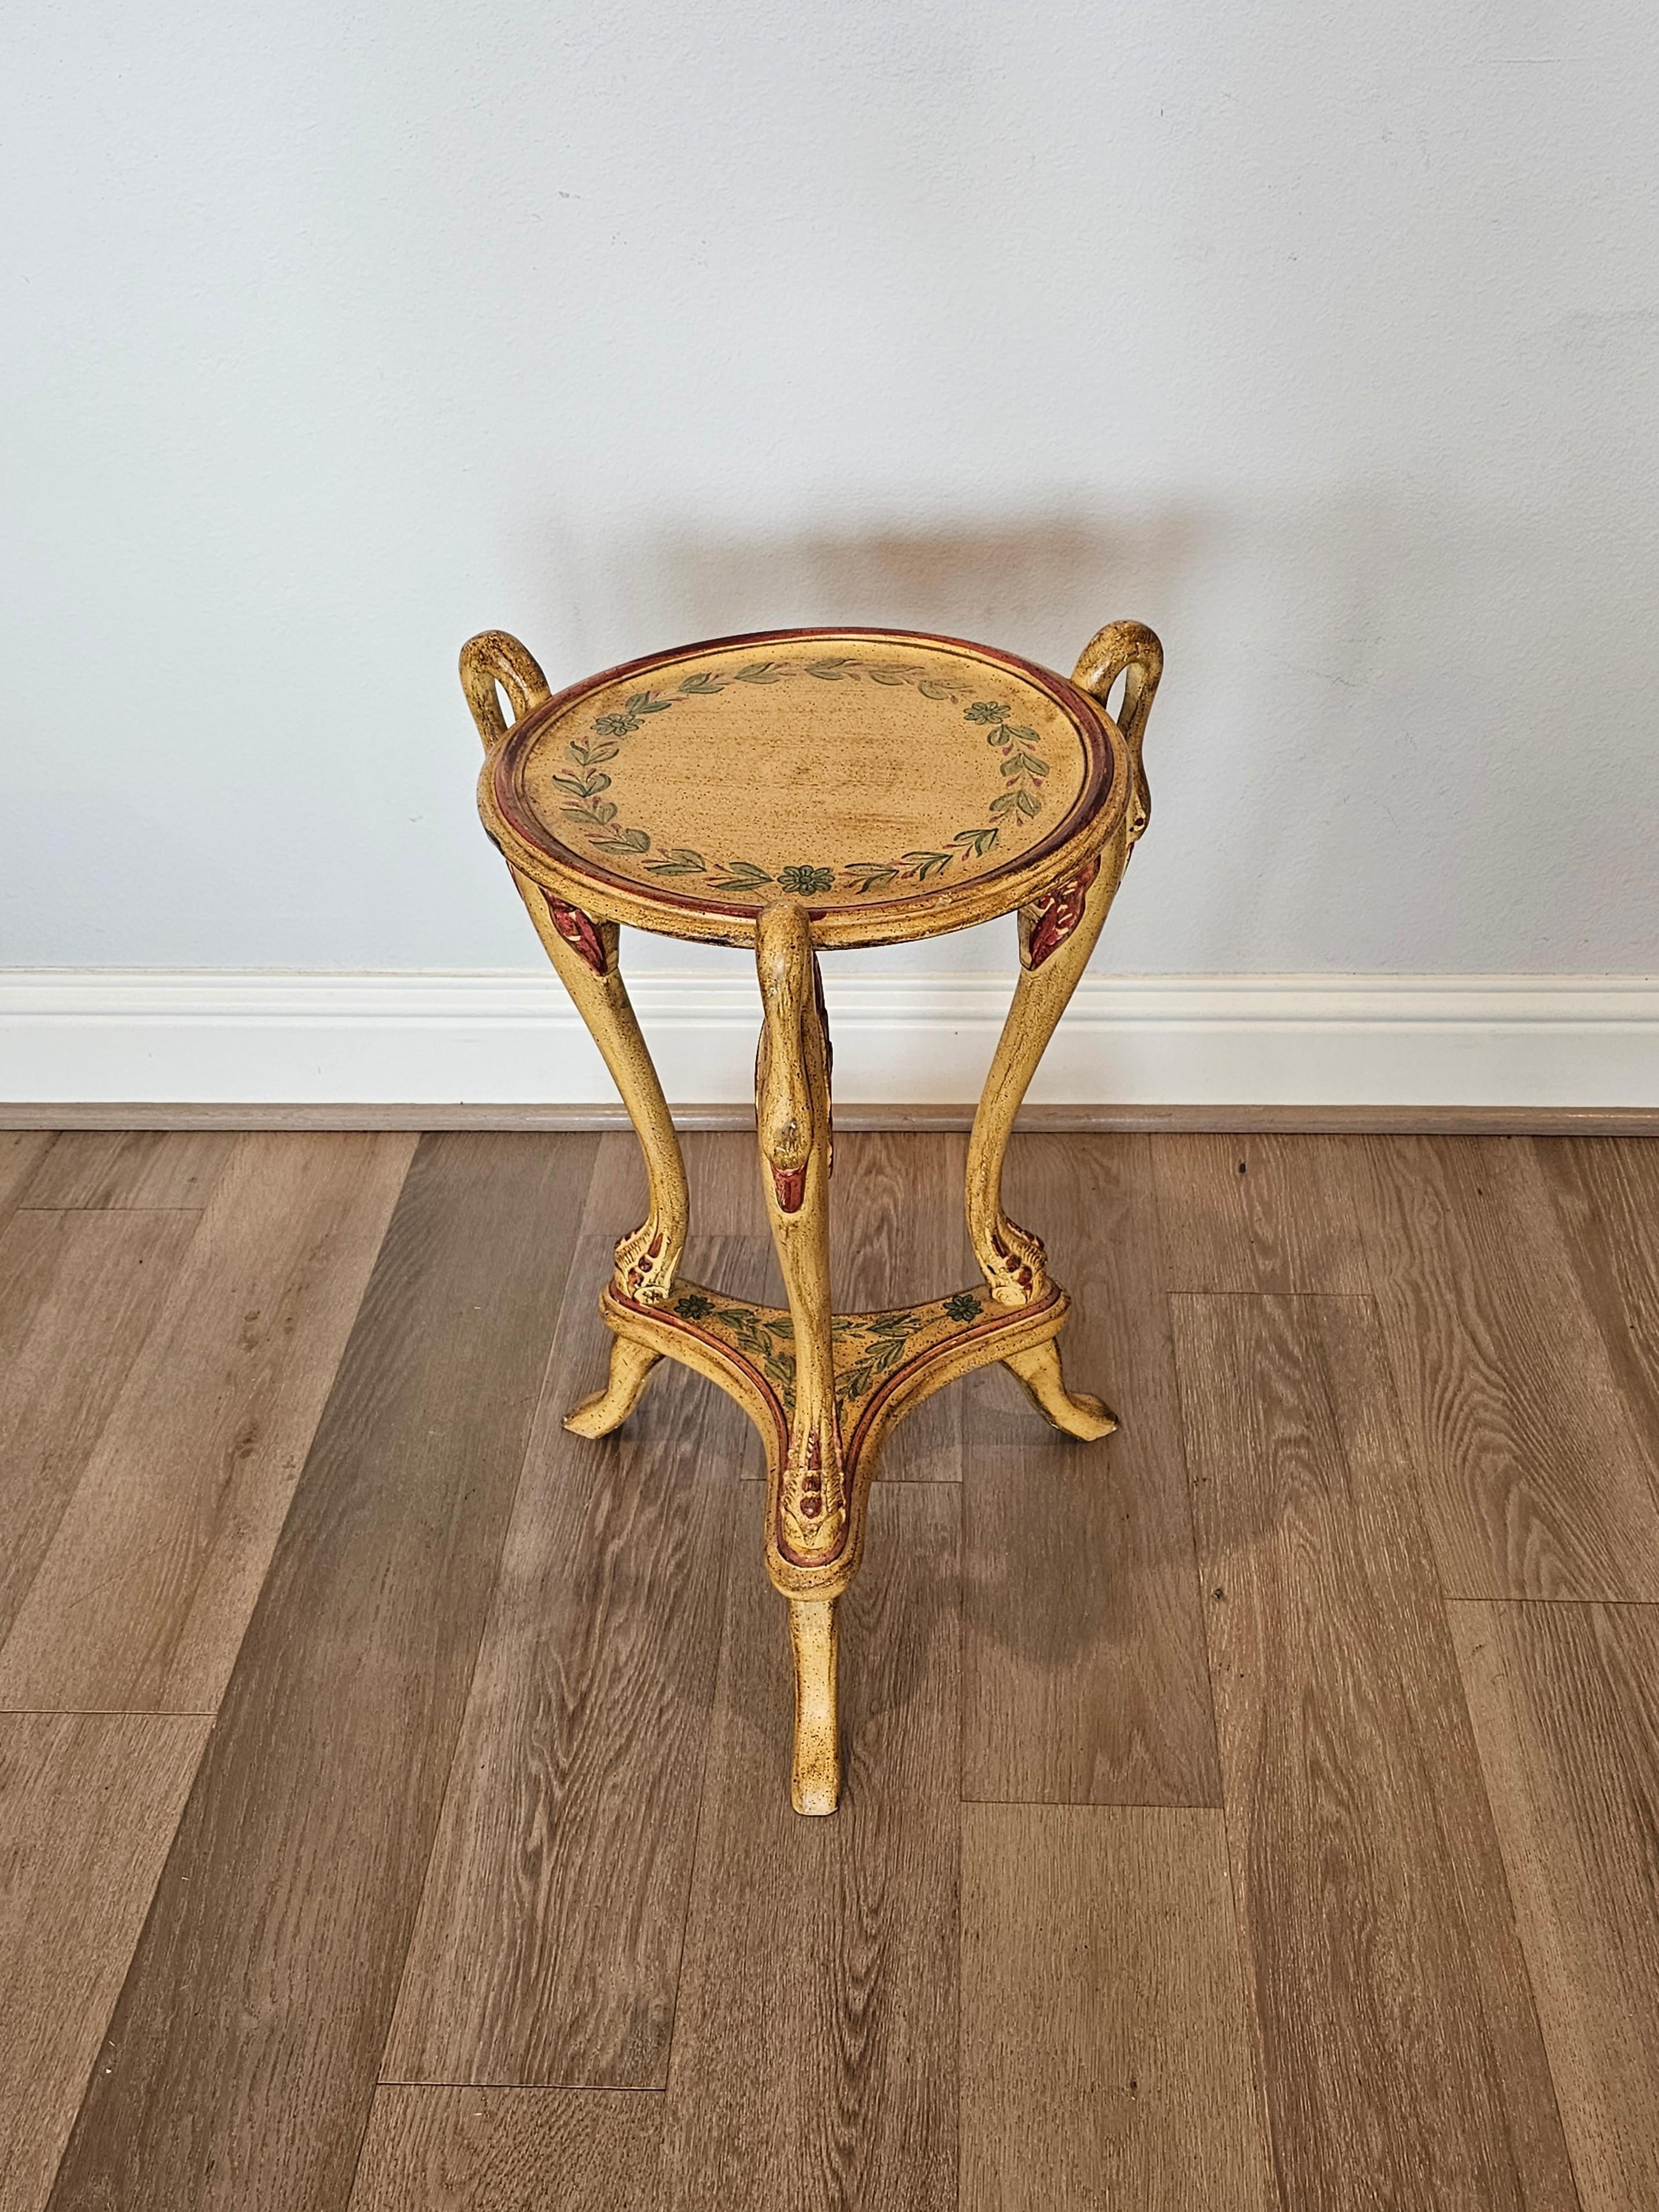 A vintage Italian Neoclassical style carved polychrome painted guéridon side table.

Born in the first half of the 20th century, elegant sculptural silhouette, Napoleonic Empire influence, having a circular top, rising on figural swan-form cabriole